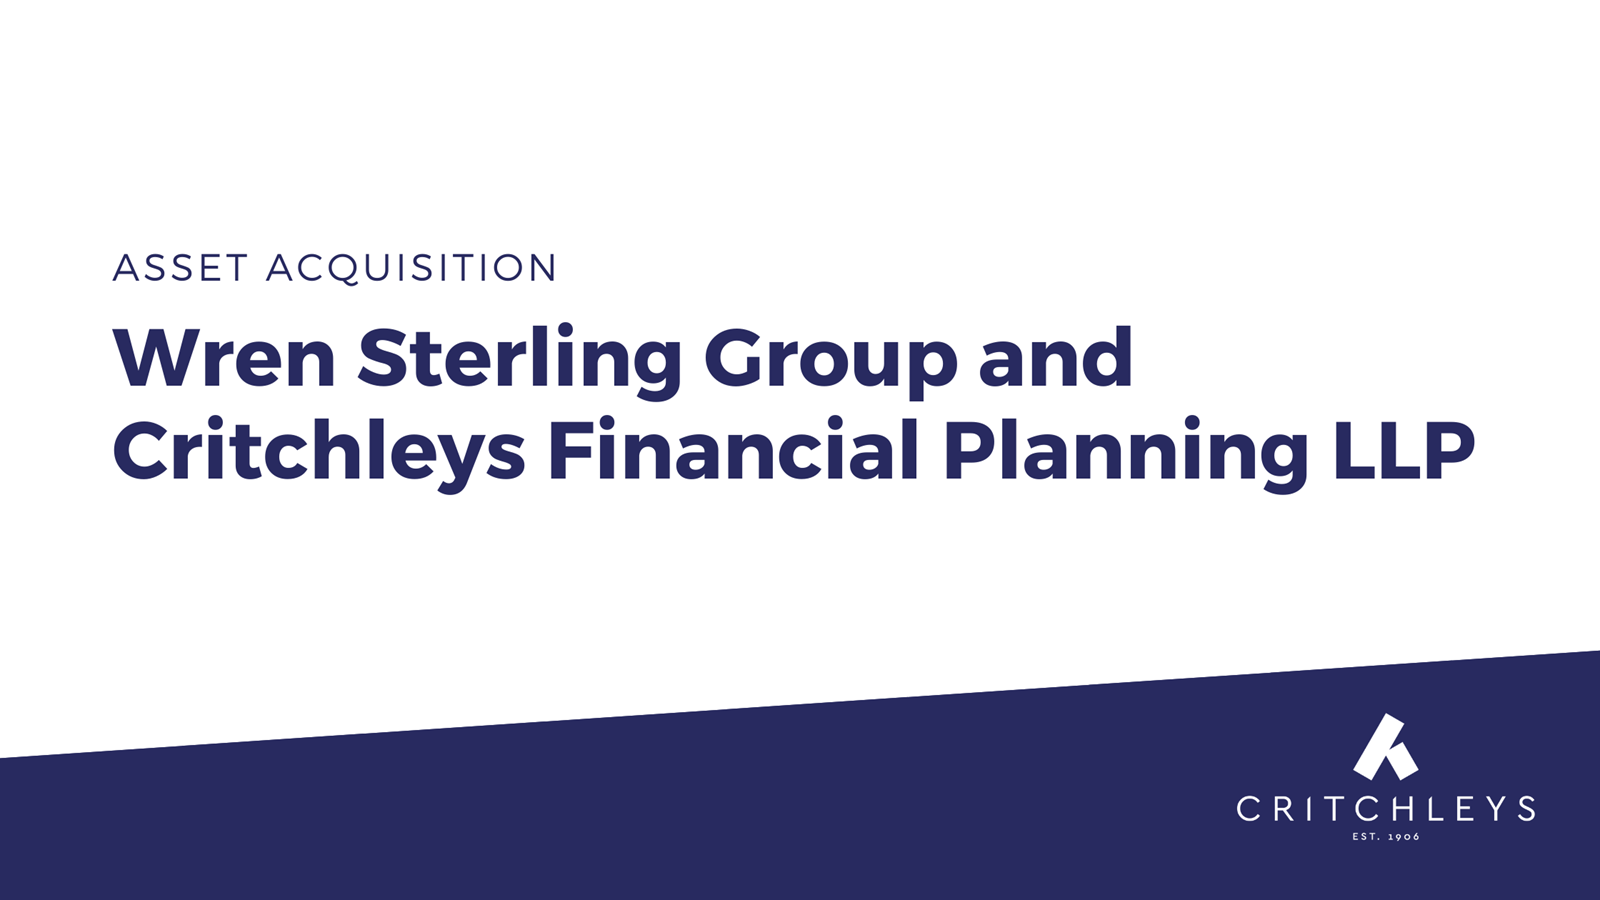 The acquisition of Critchleys Financial Planning LLP assets